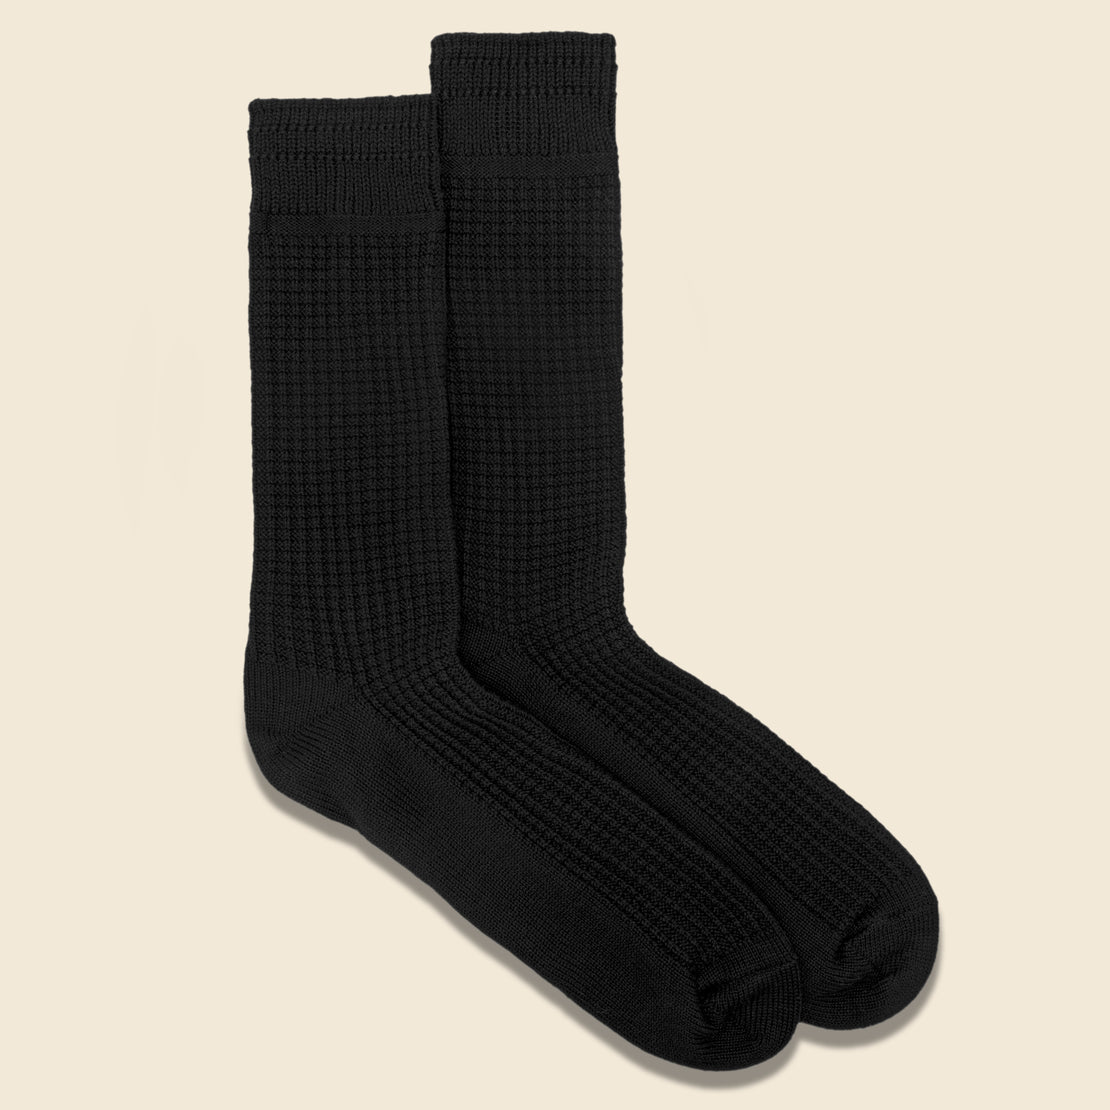 Cotton Waffle Sock - Black - RoToTo - STAG Provisions - Accessories - Socks